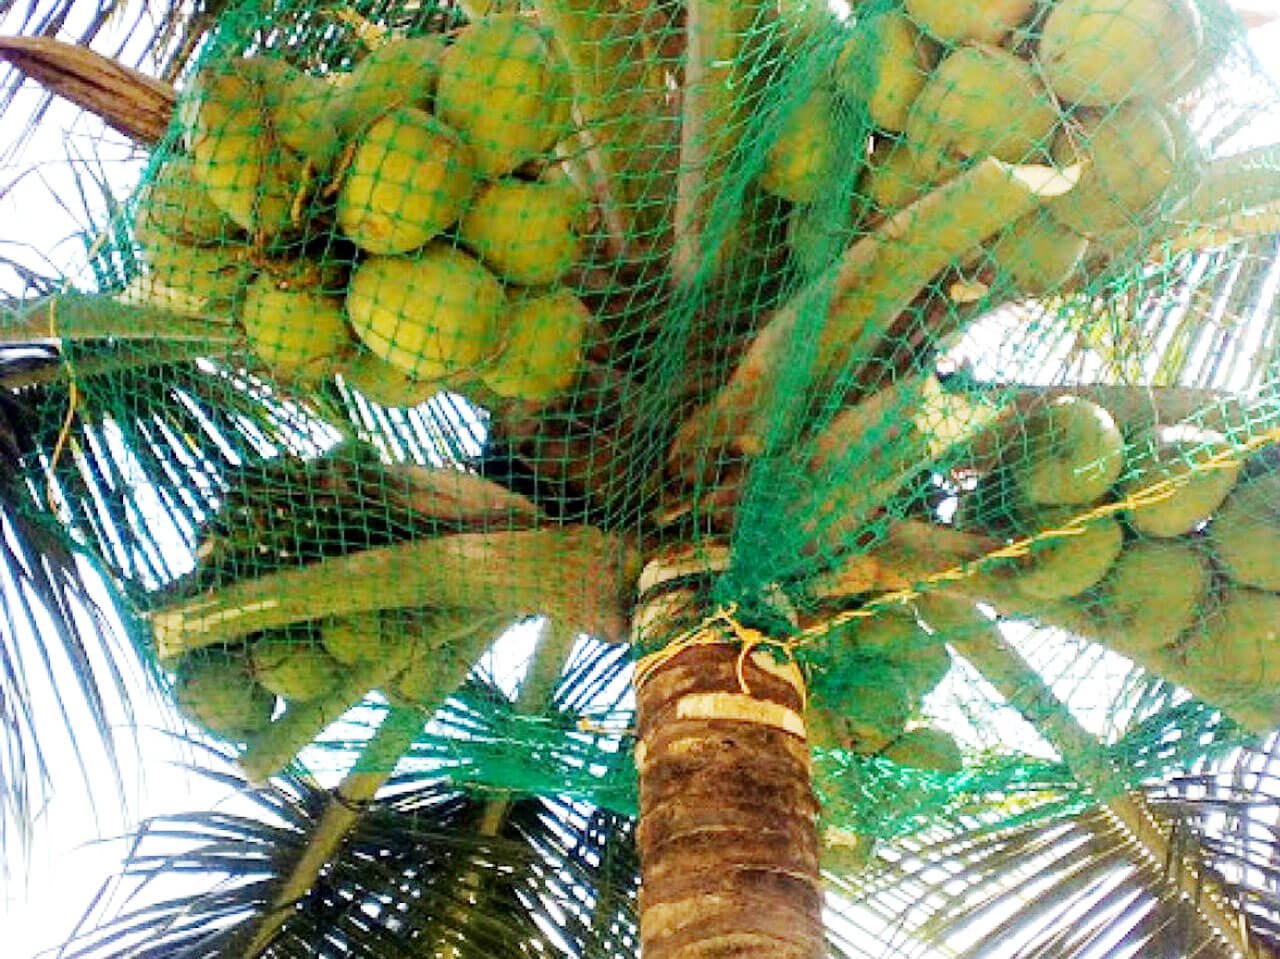 Coconut Tree Safety Net Installation in Bangalore | Call "Menorah CocoNets" - 6362539199